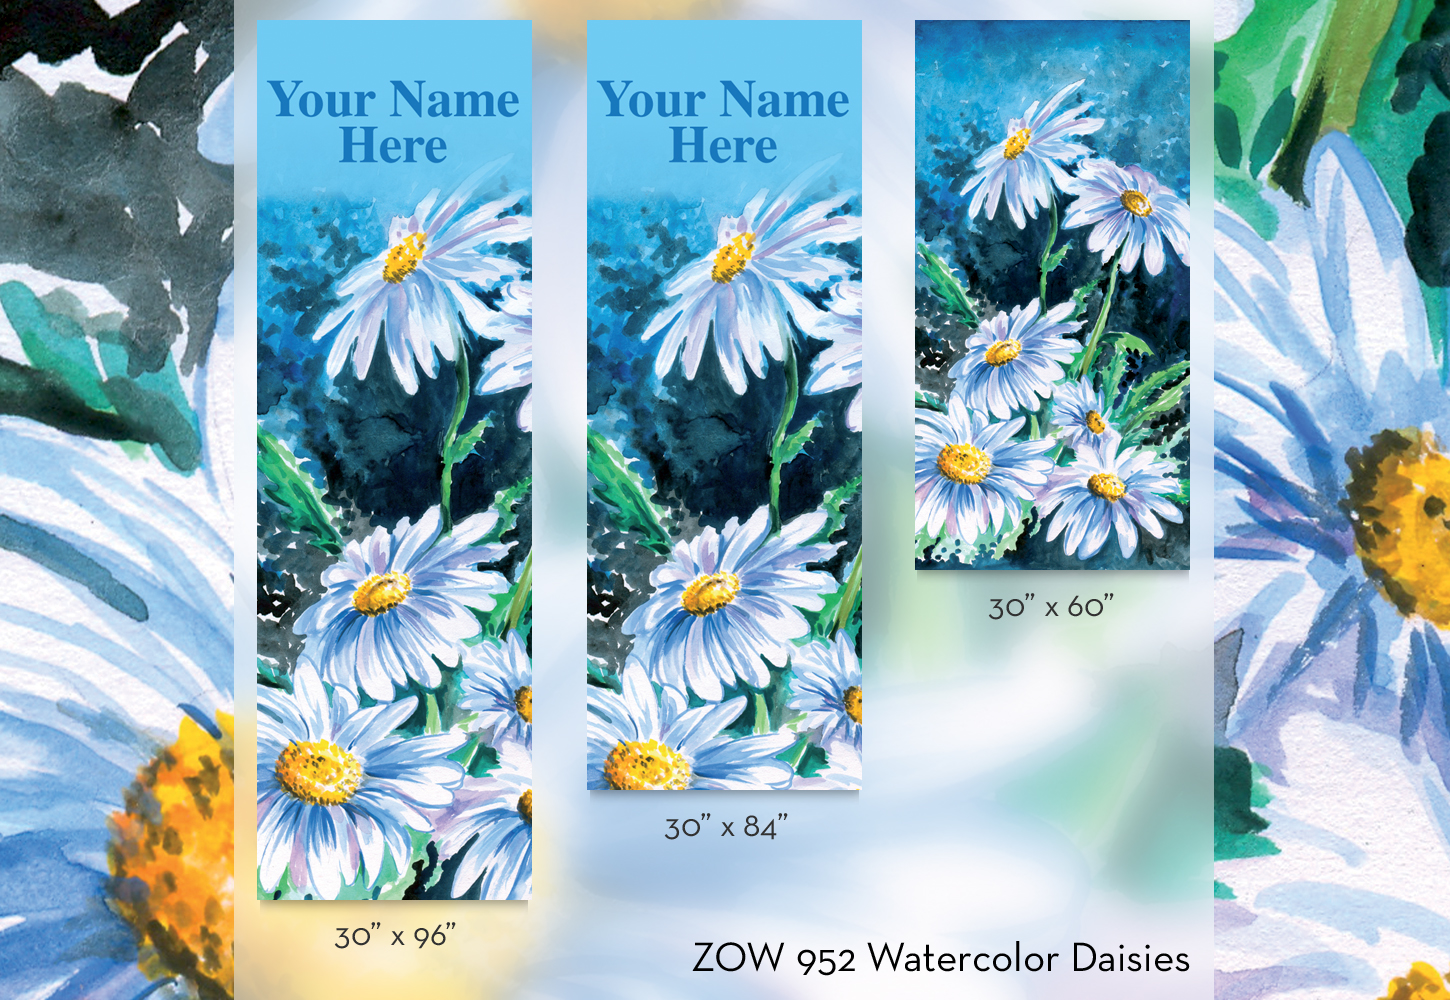 ZOW 952 Watercolor Daisies